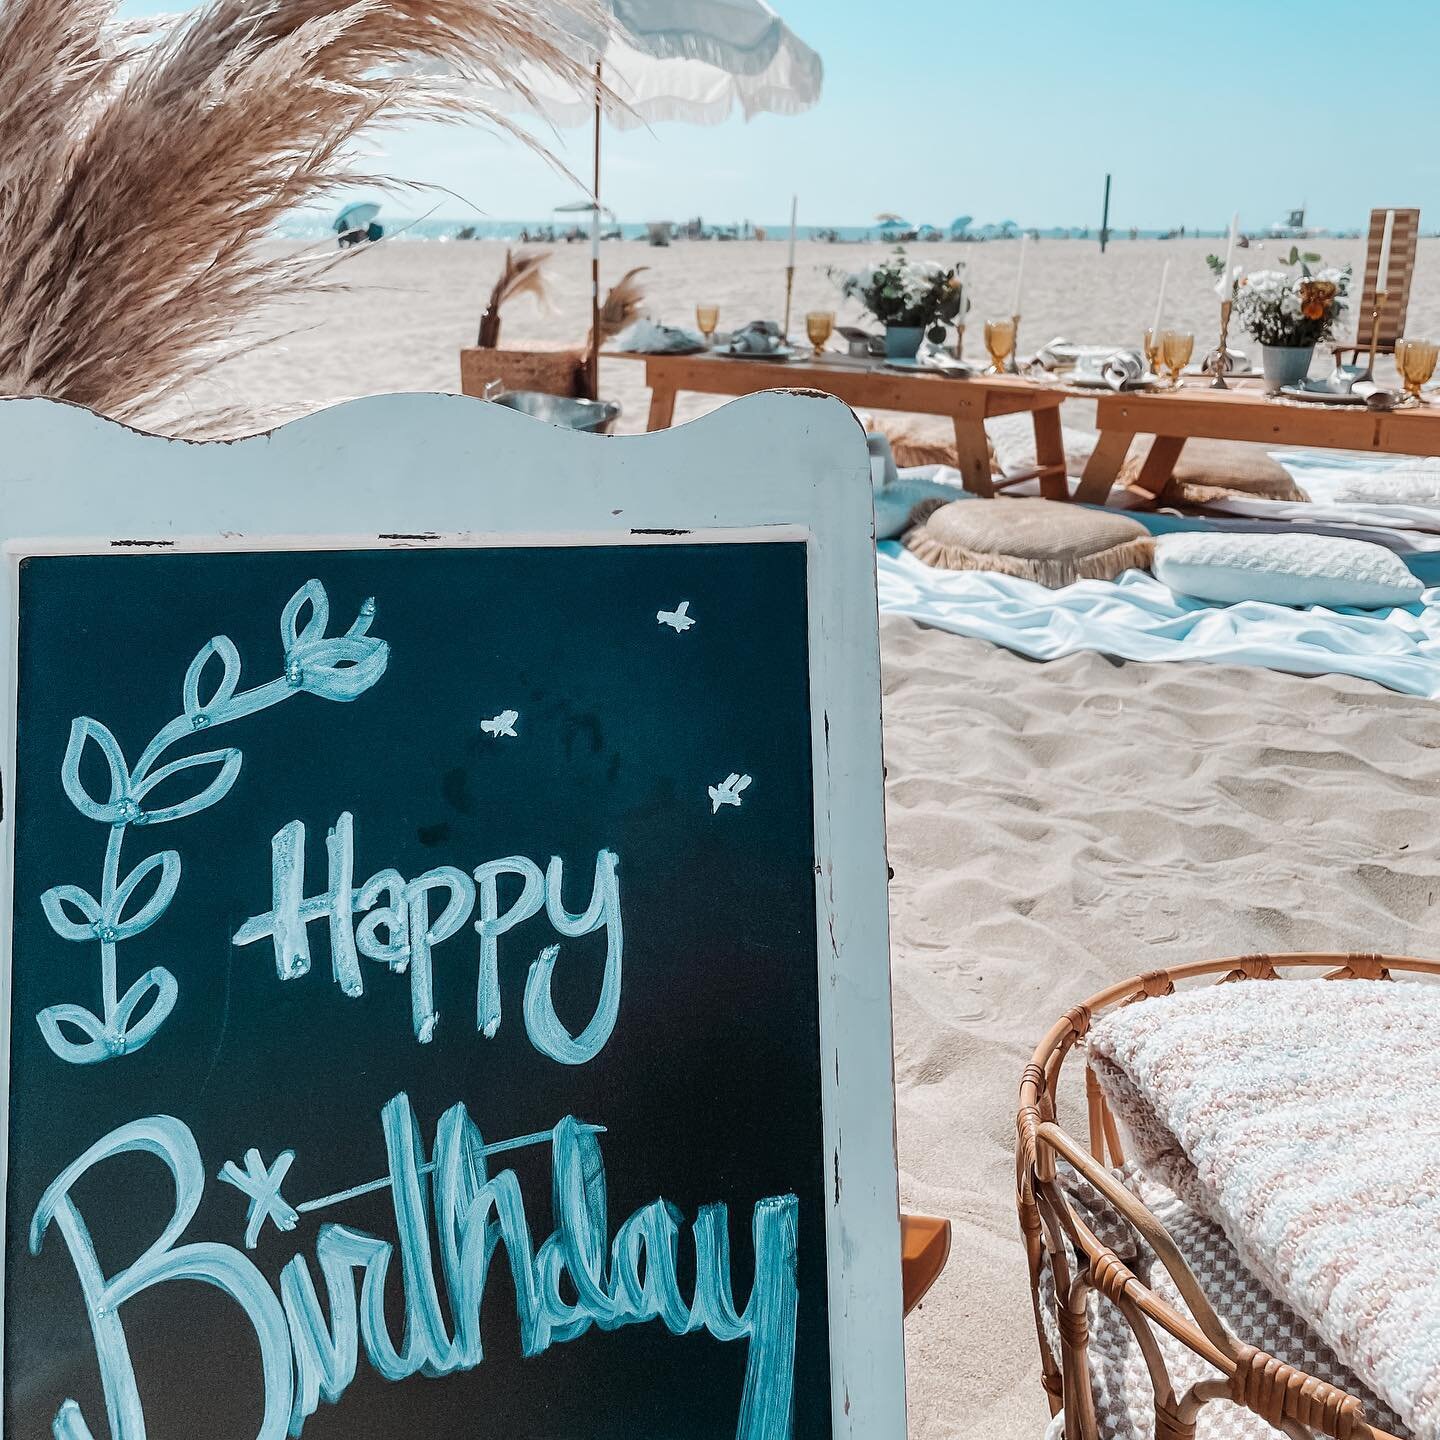 Want to celebrate your next special day!? DM us or head to our website to learn more about how we can help make your special day extra special! 
.
.
.
.
#hellopicnicoc #letussetthetableforyou #picnicsoc #beaches #parks #social #ocevents #picnic #chee